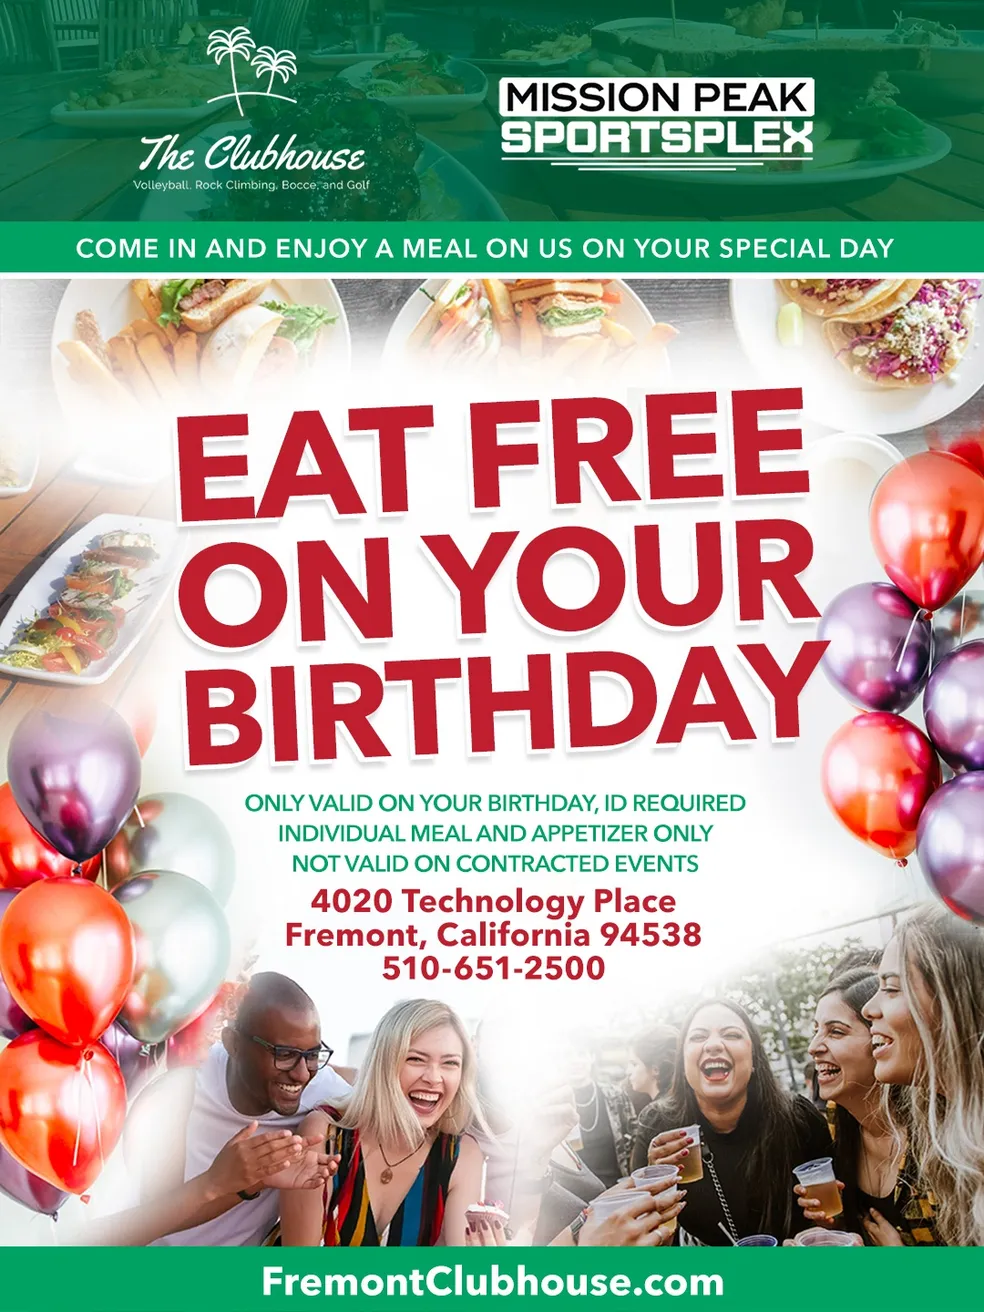 Eat FREE on your Birthday at The Clubhouse in Fremont